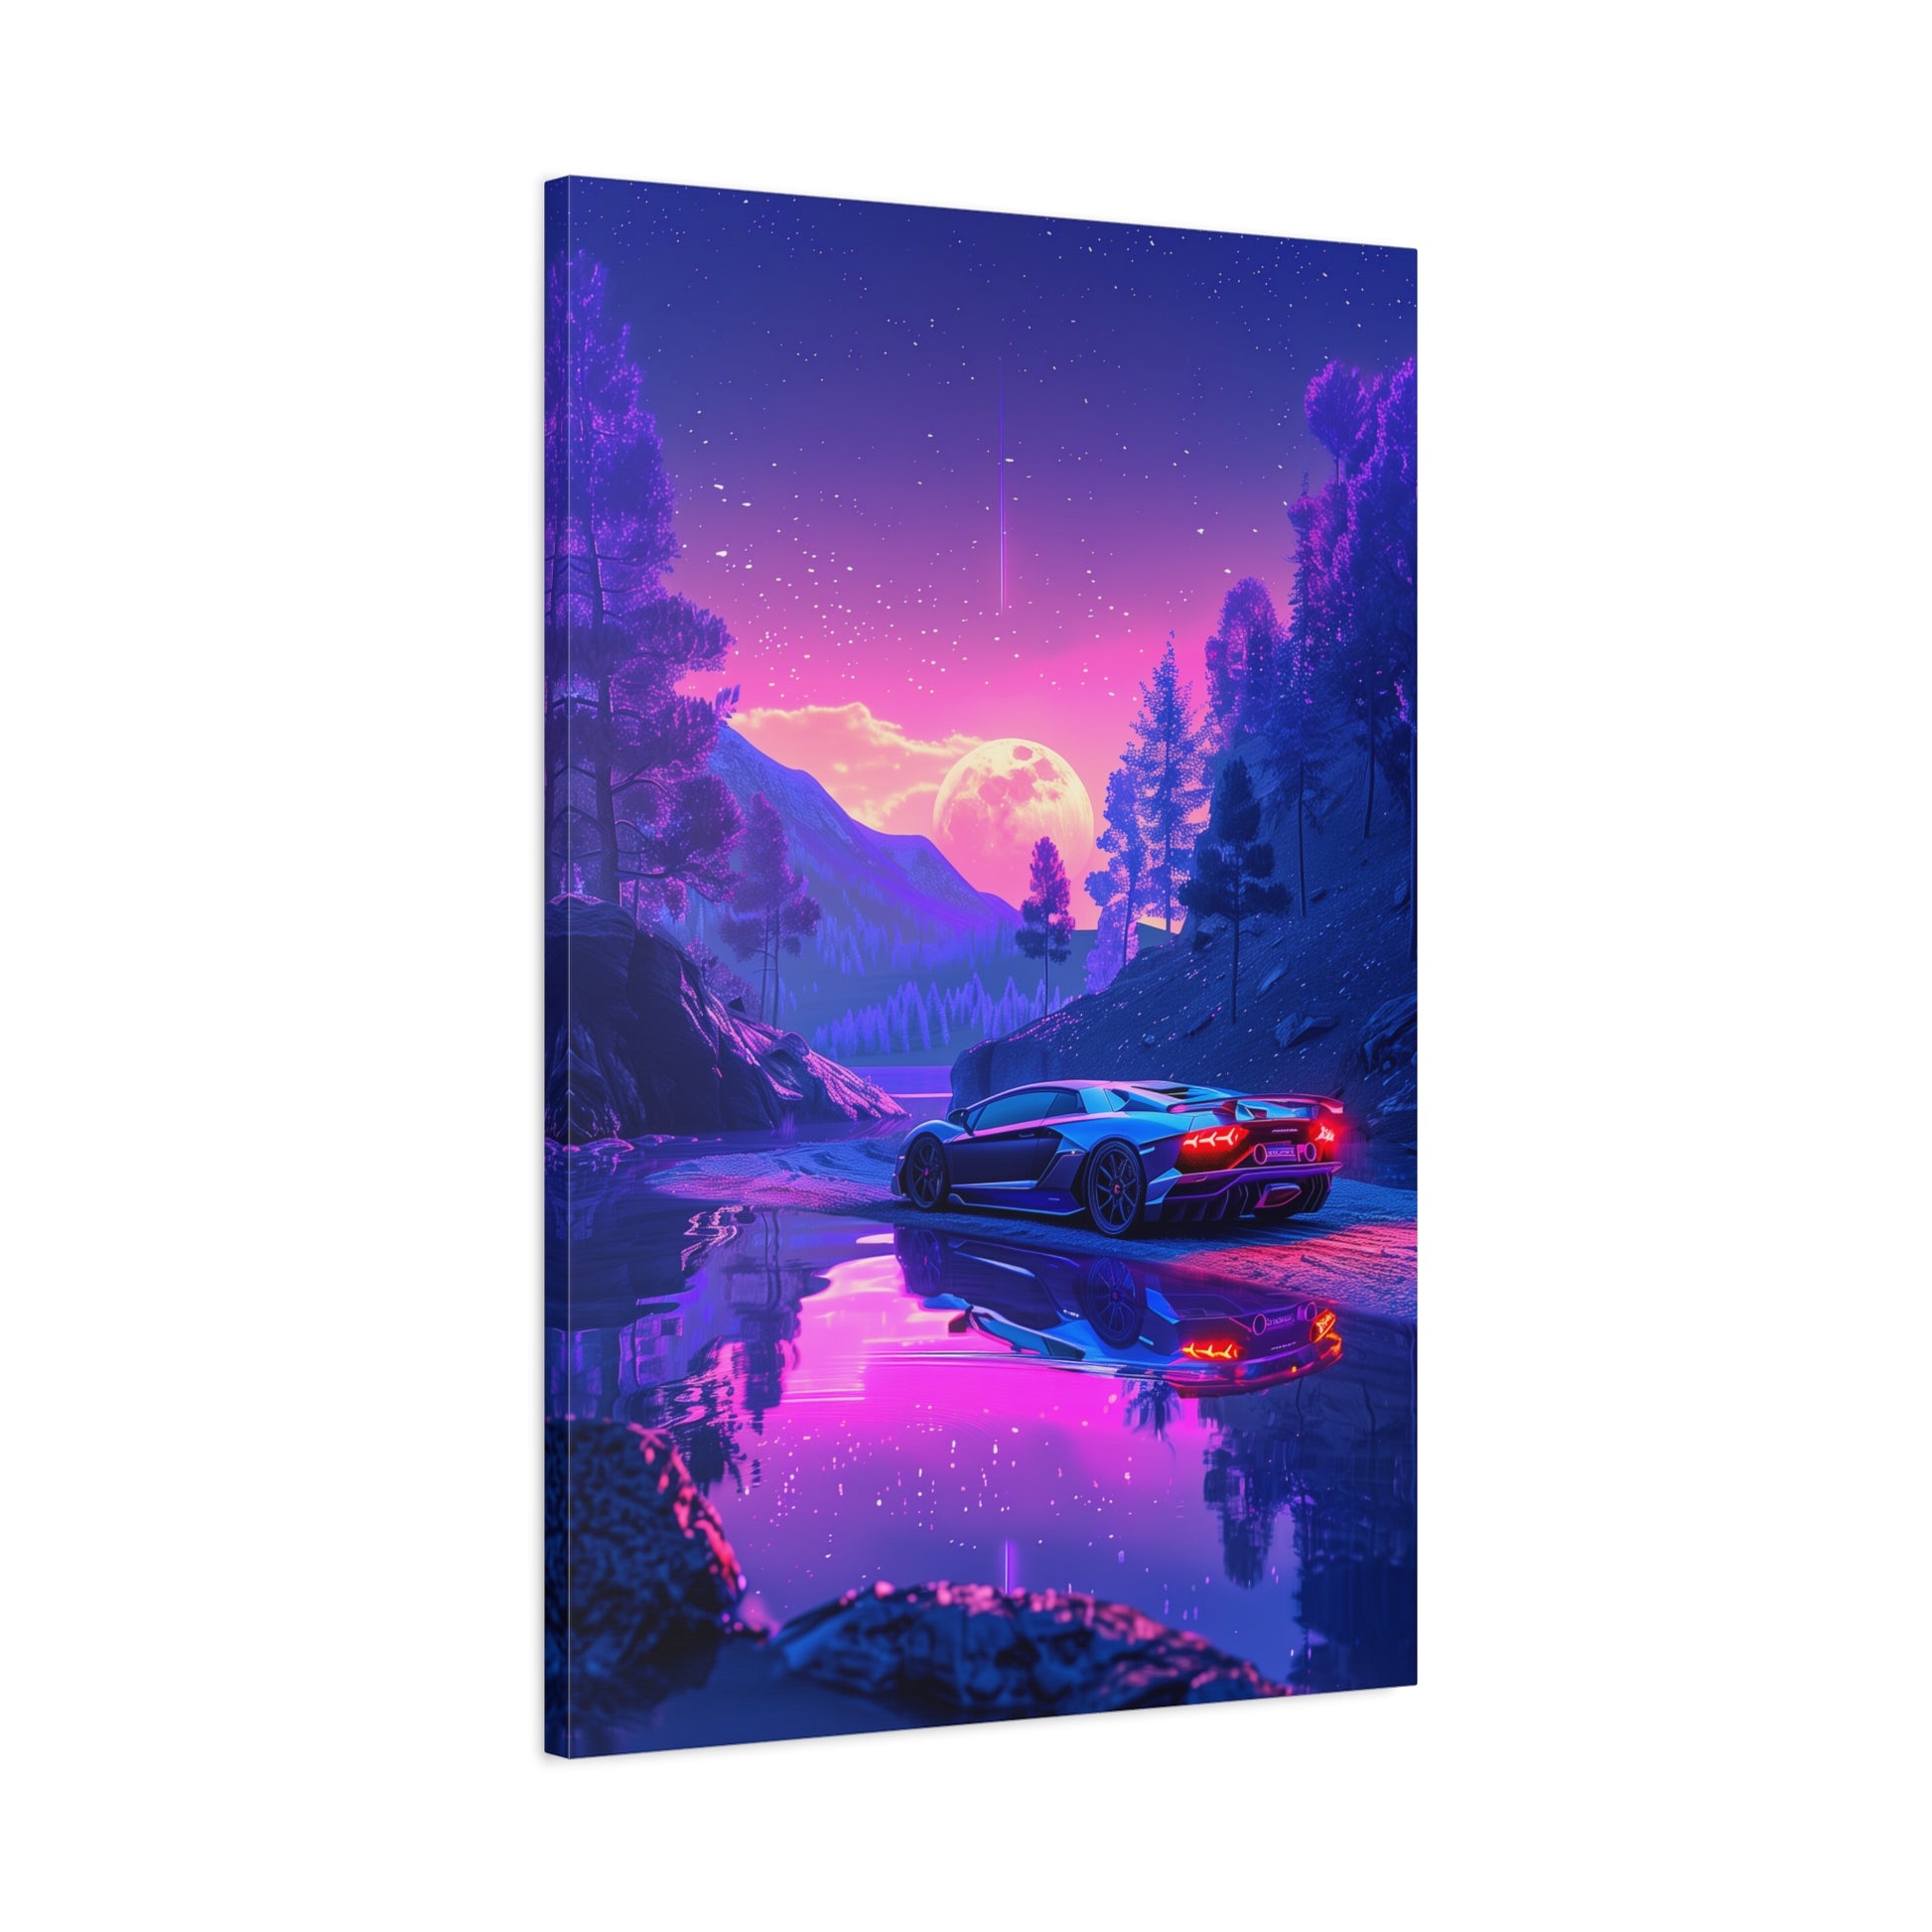 Twilight Reflections (Canvas)Transform your living space with our modern home decor. From minimalist to boho chic, find pieces that reflect your style. Shop todayRimaGallery